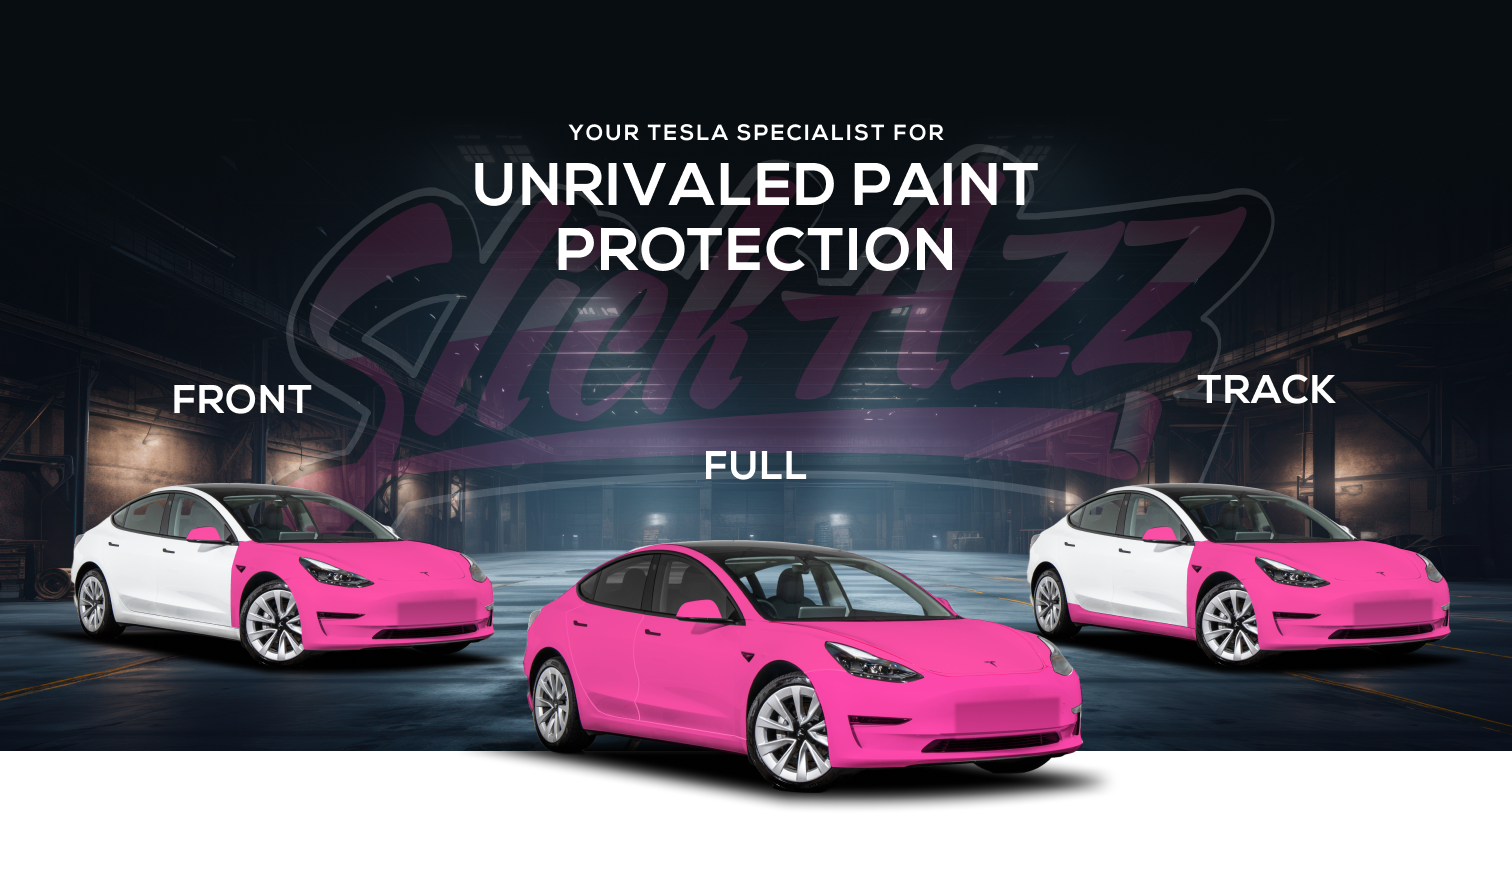 Your Tesla Specialists for Unrivaled Paint Protection